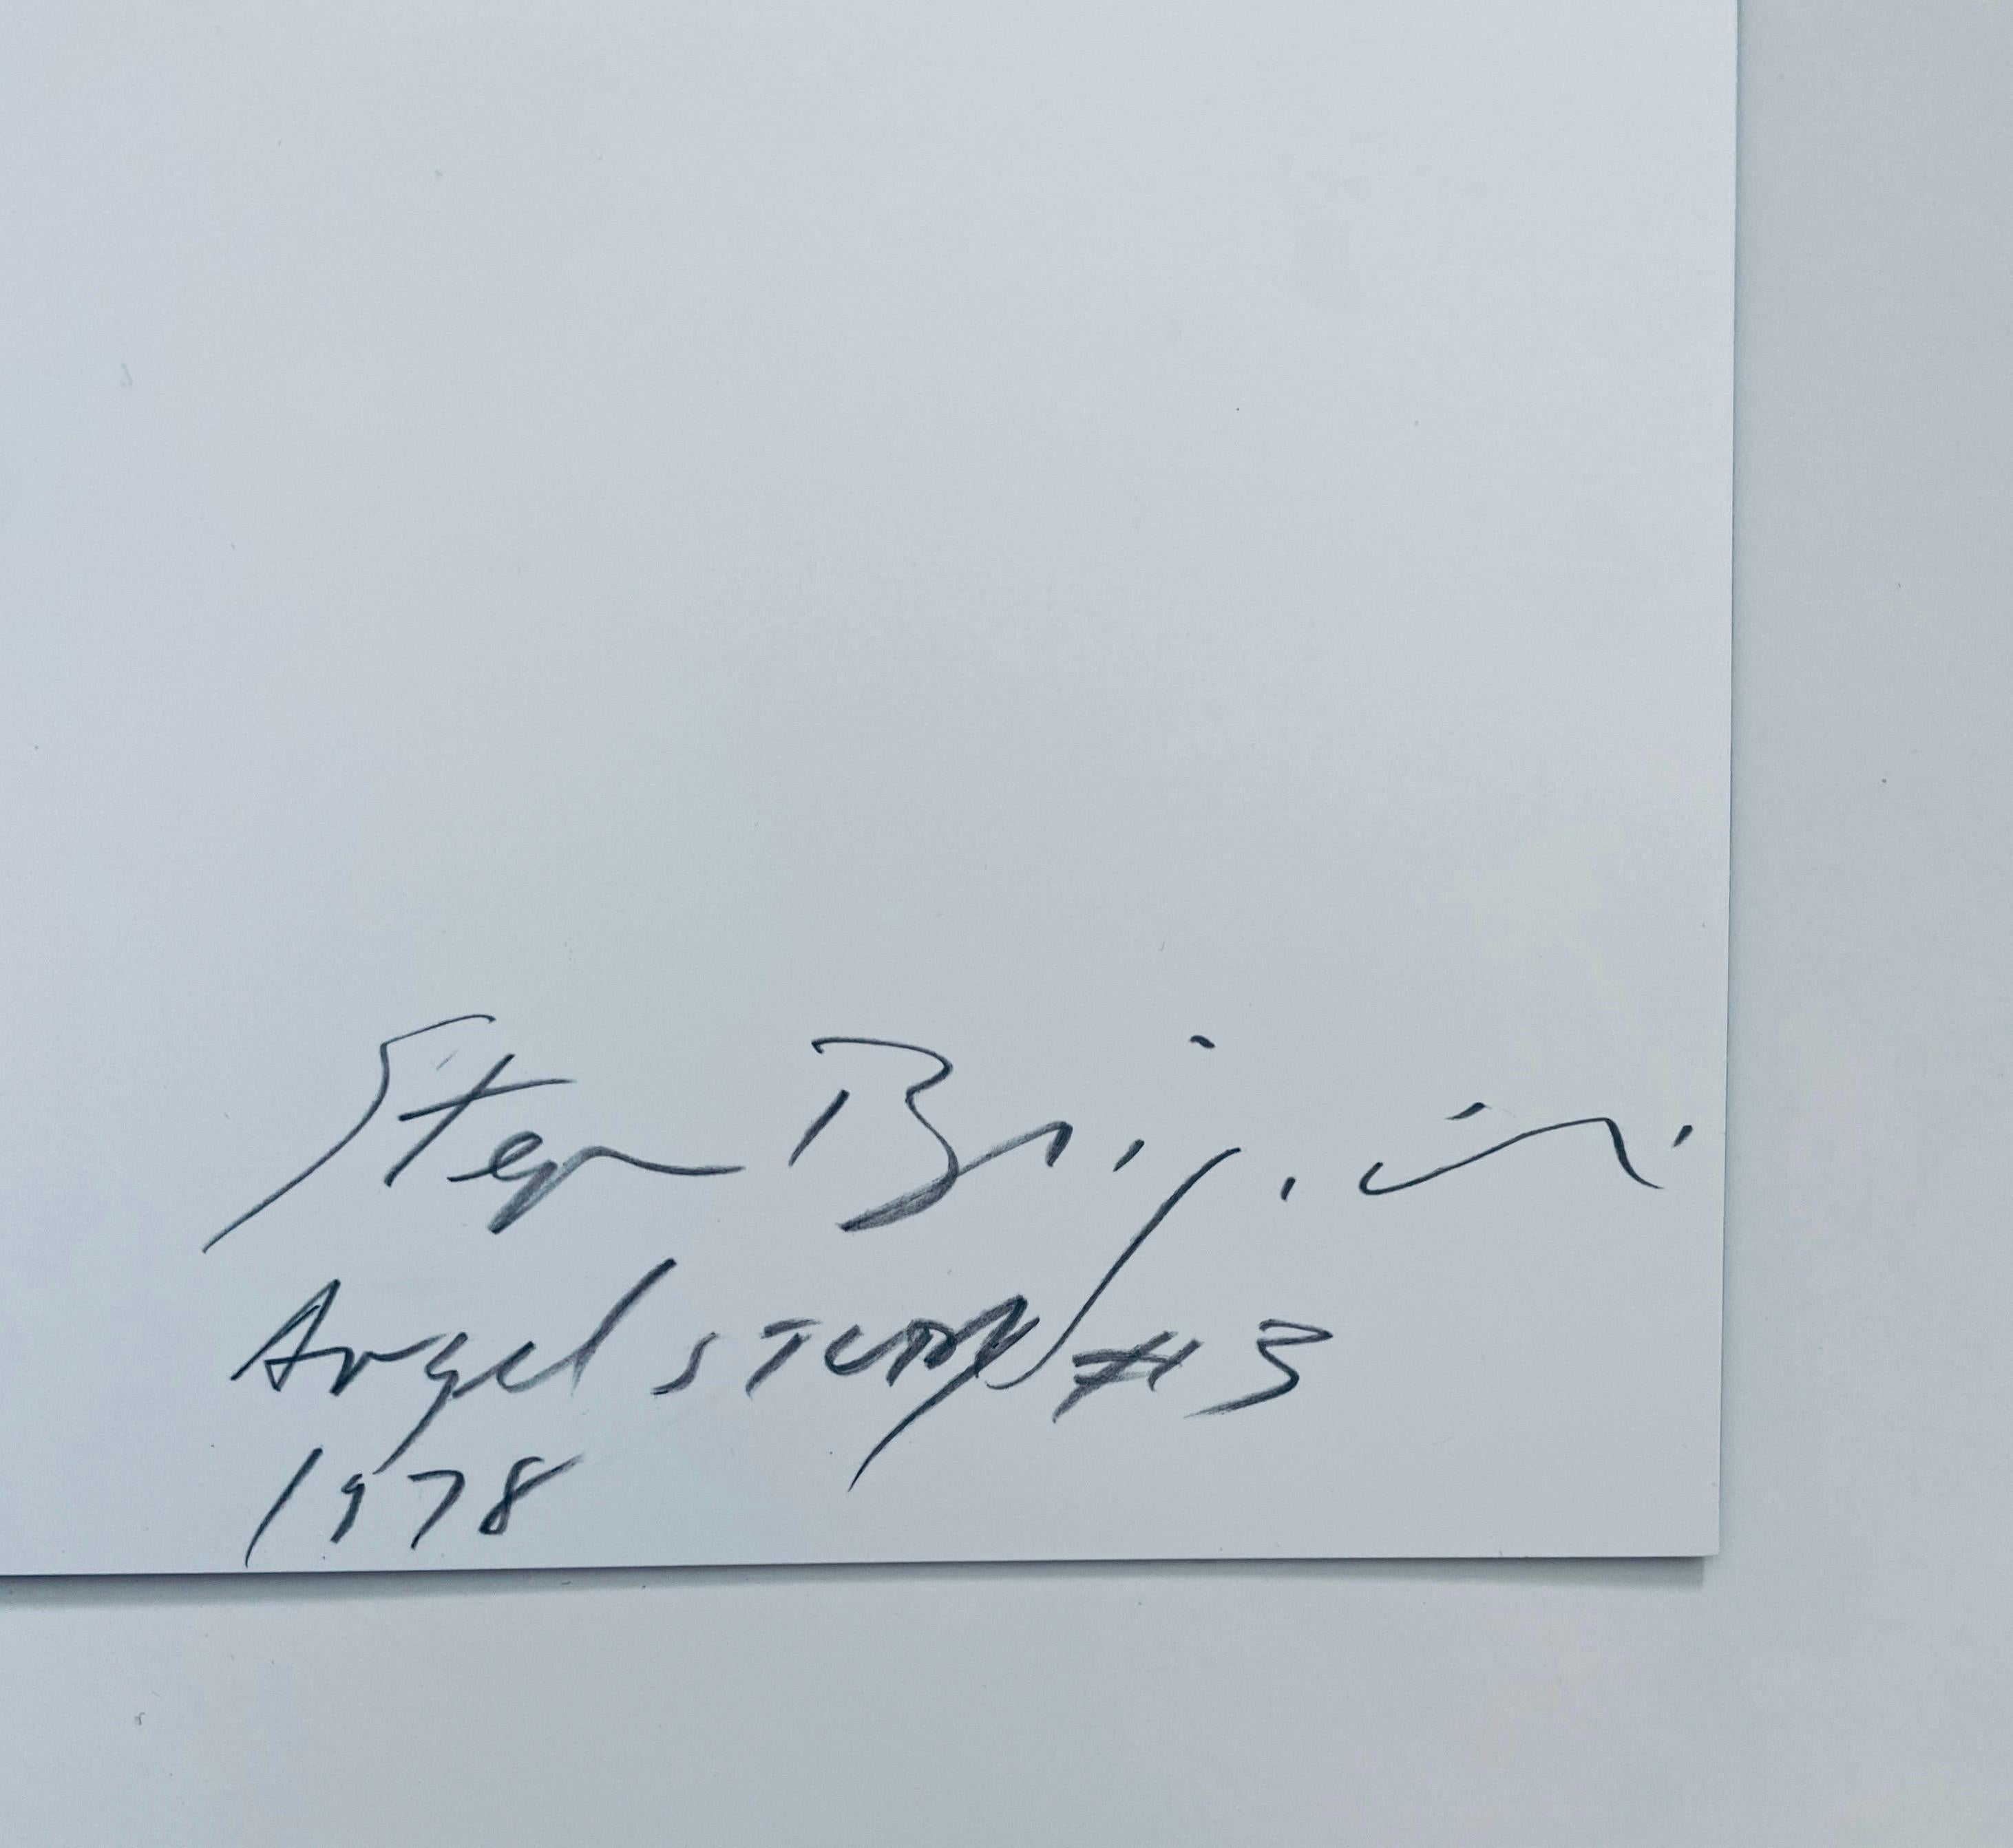 Hand signed, titled and dated verso.
Stephan Brigidi was born in Providence, Rhode Island in 1951, and is a widely published artist whose work has been exhibited throughout the United States and Europe. Brigidi received his MFA at RI School of